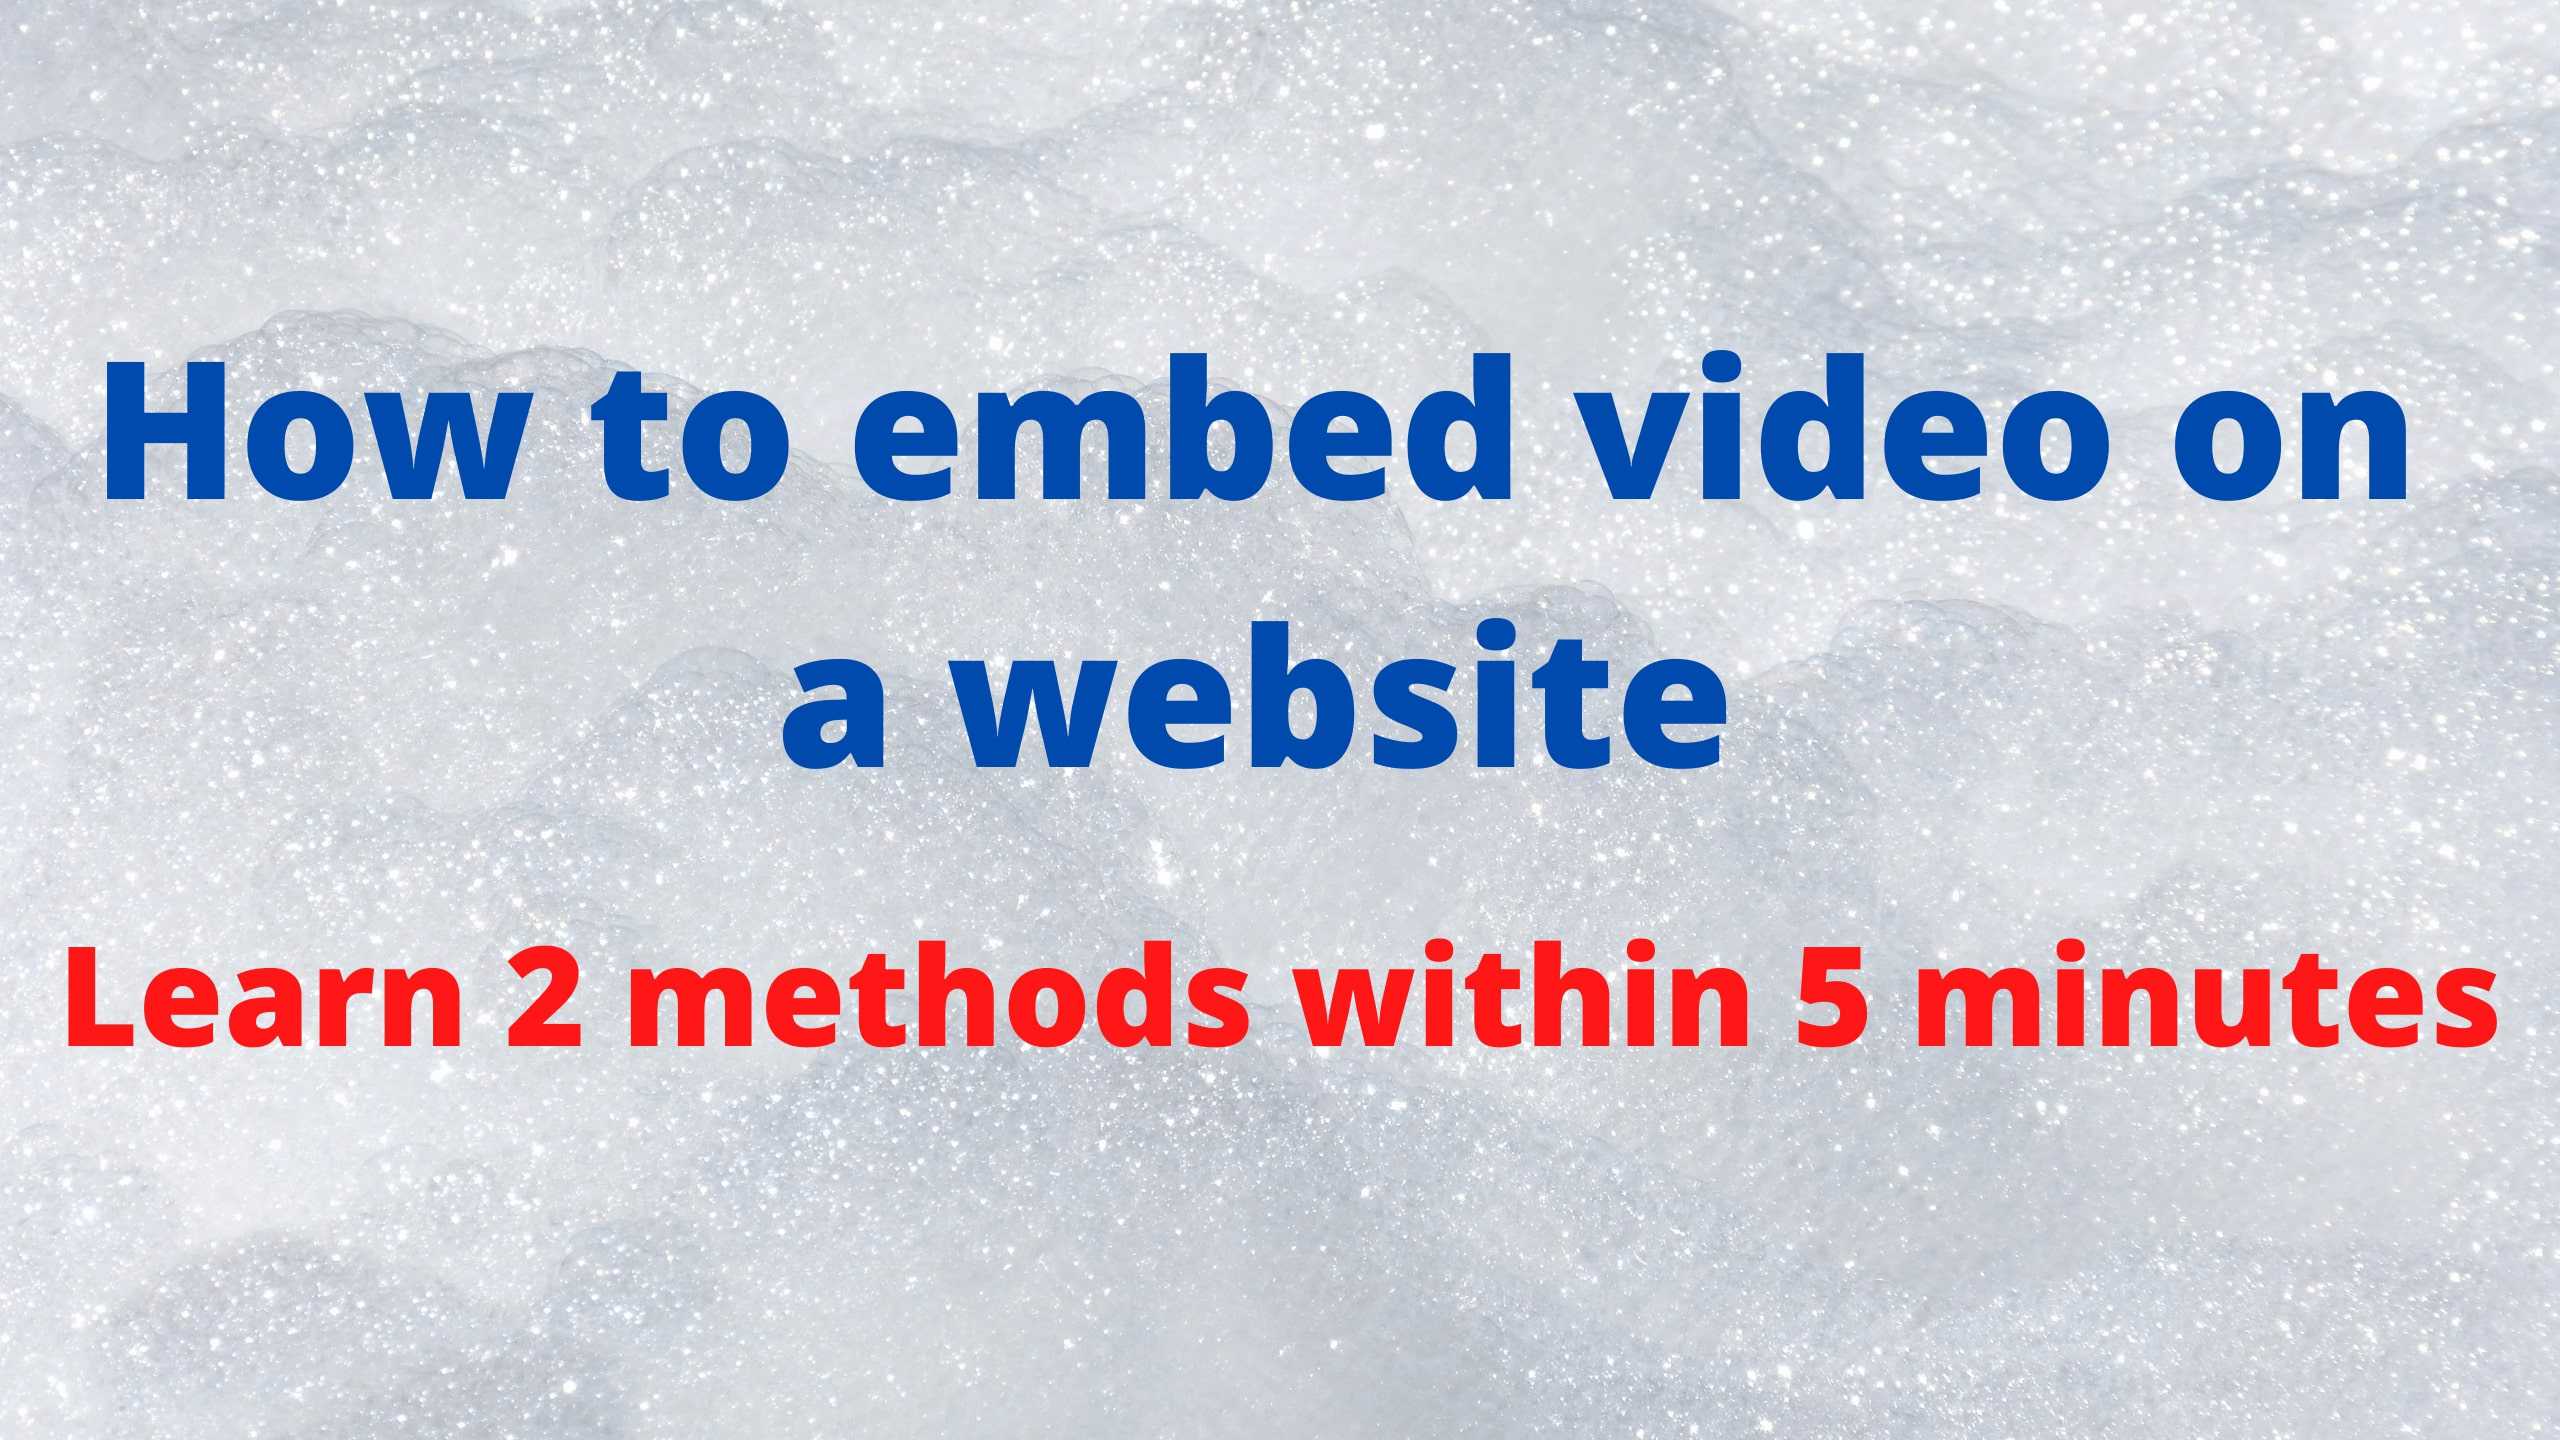 How to show the video on a web page or website?